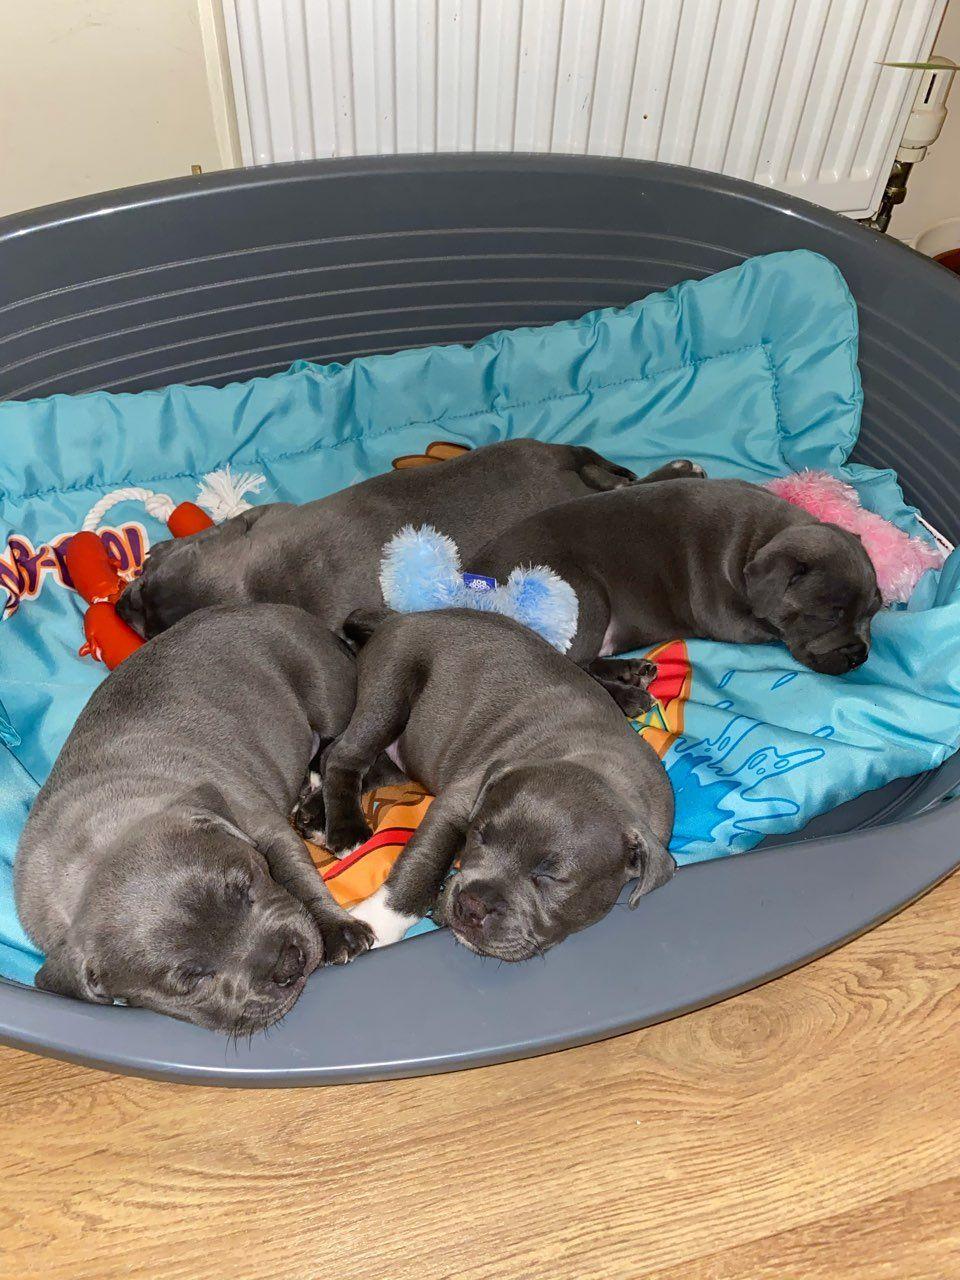 Staffordshire Bull Terrier puppies 3 Image